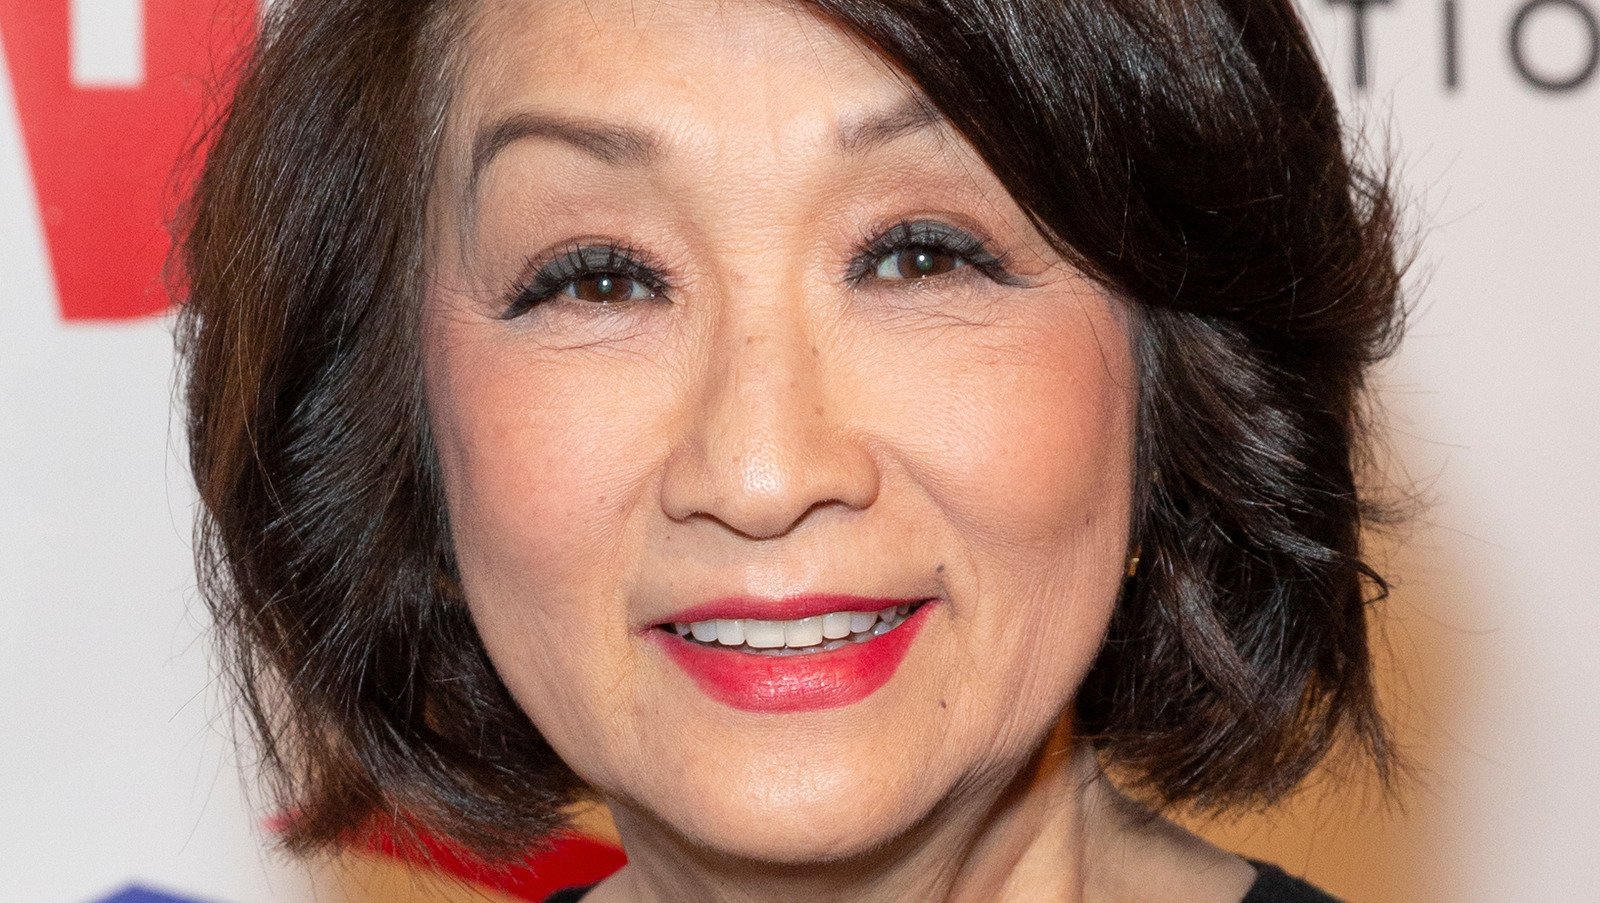 How Connie Chung Really Felt About Working With Dan Rather - Nicki Swift